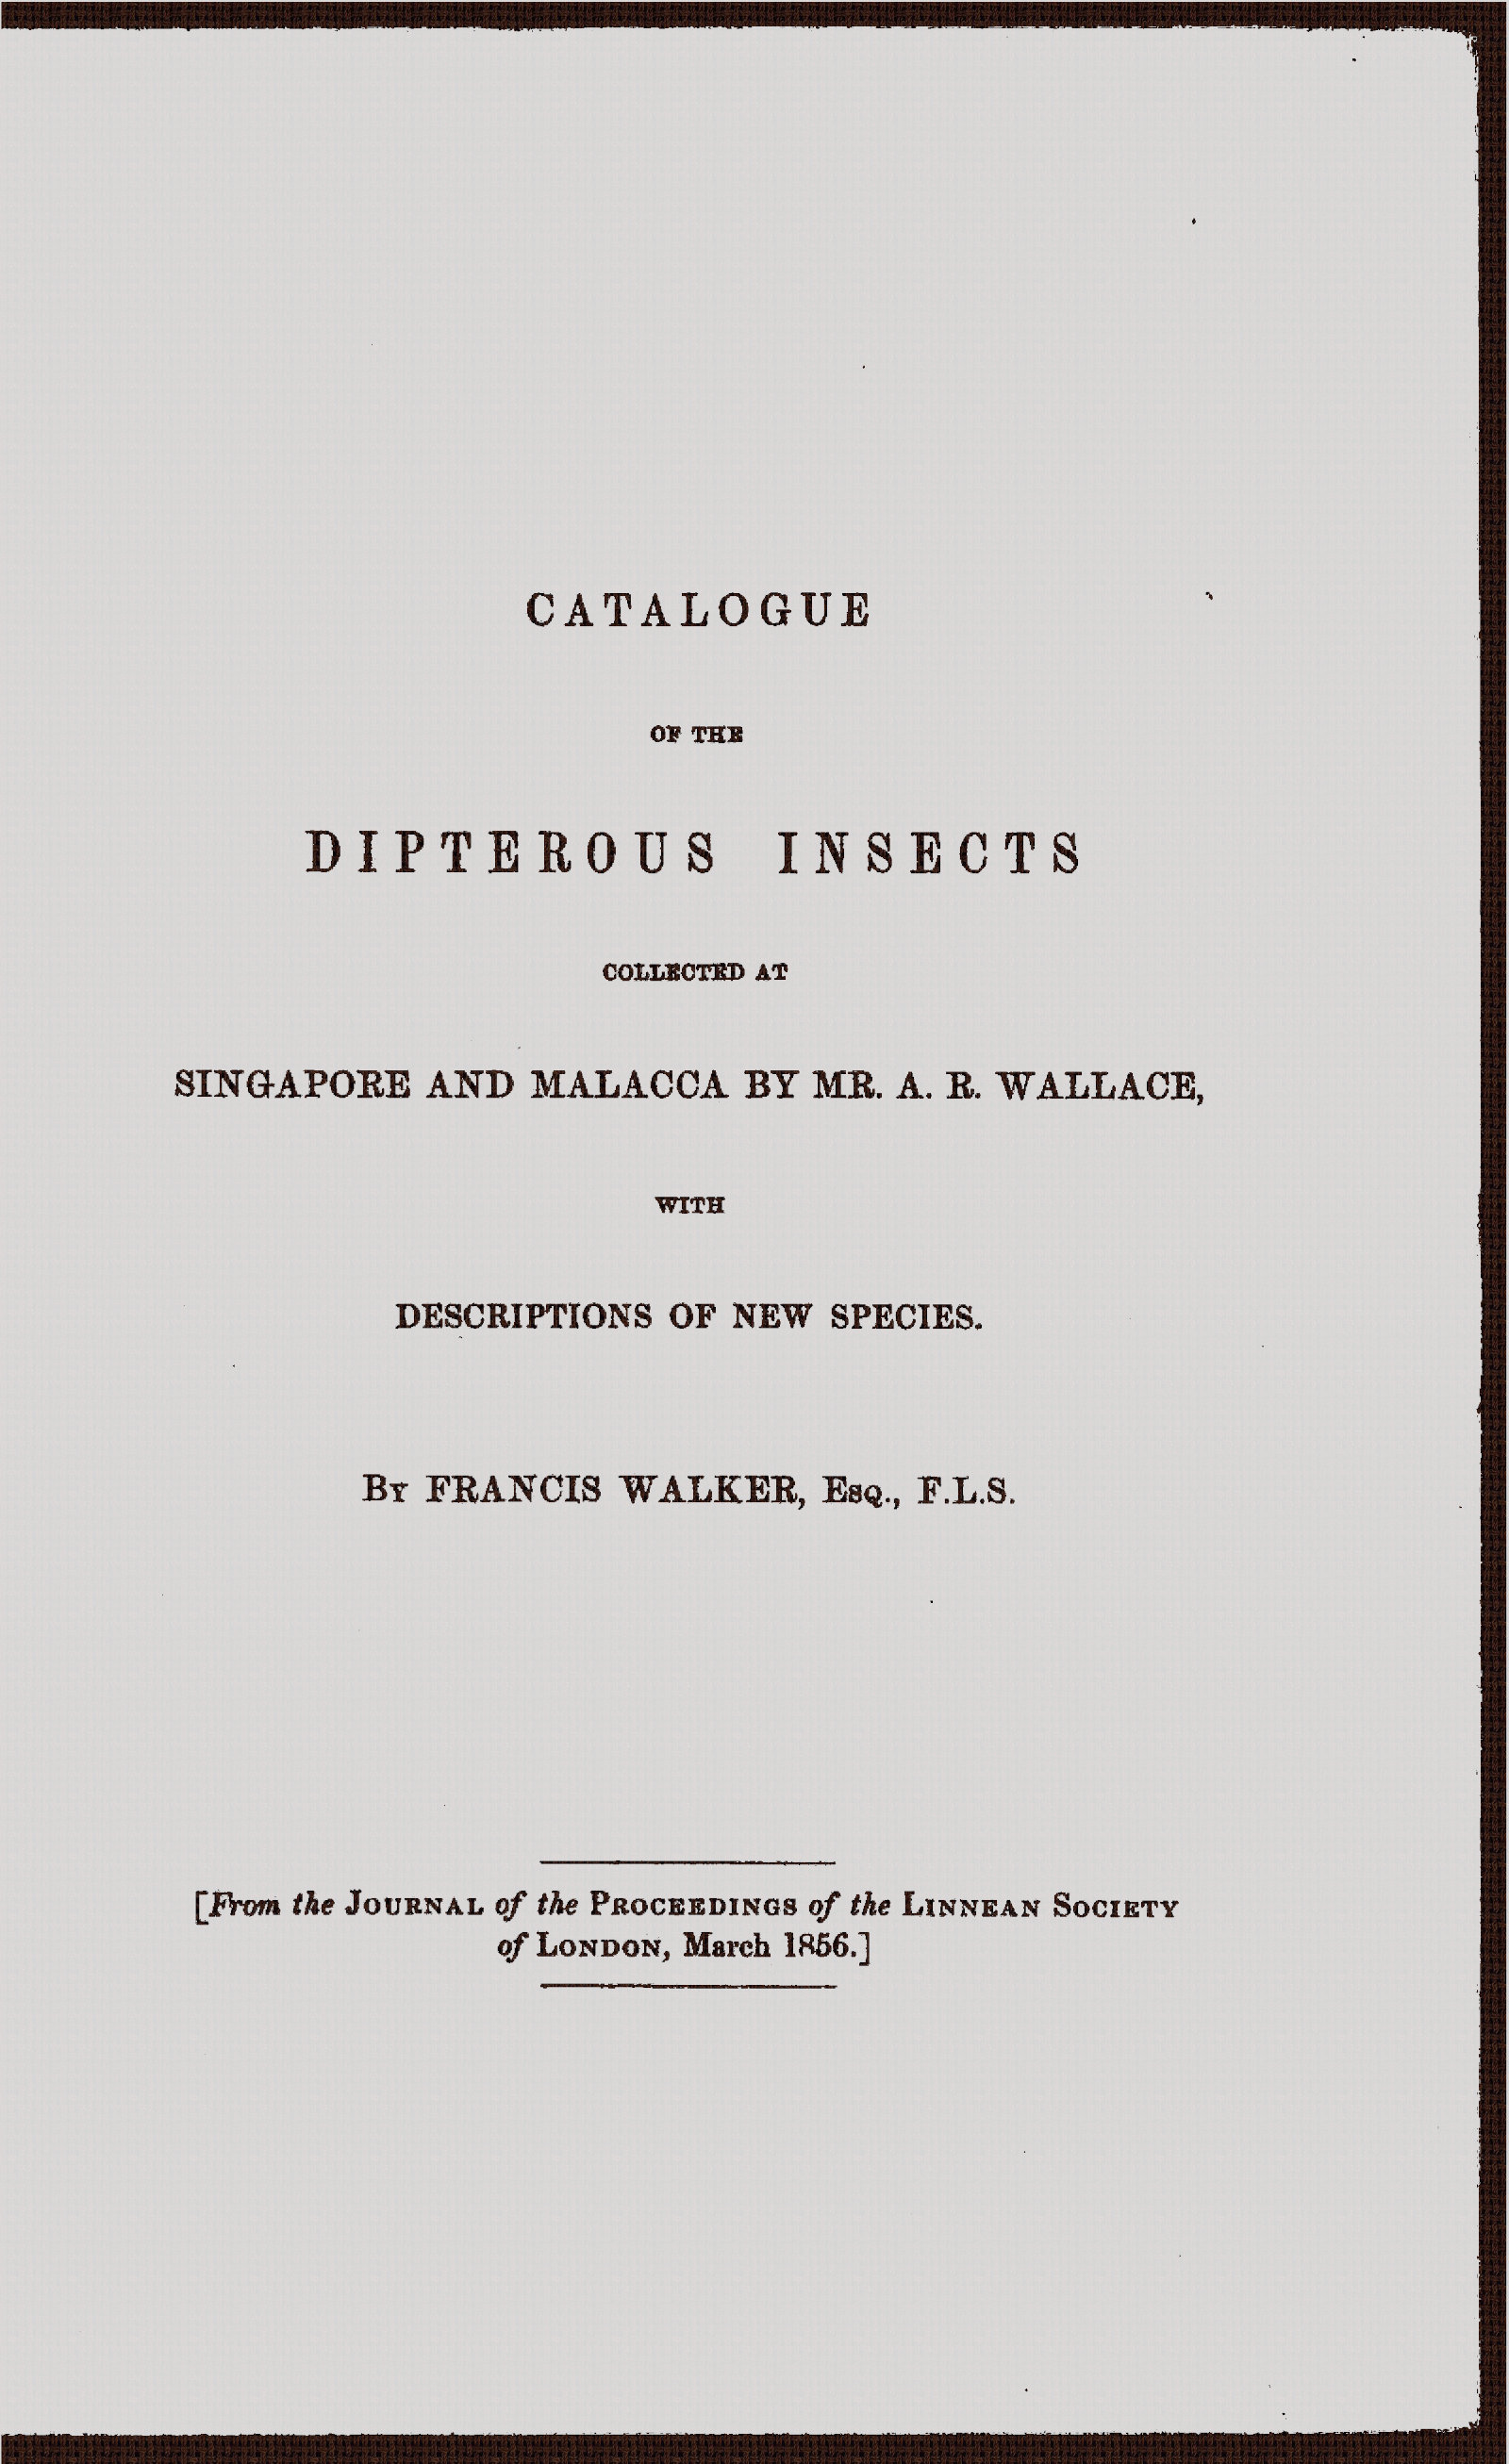 Catalogue of the dipterous insects collected at Singapore and Malacca